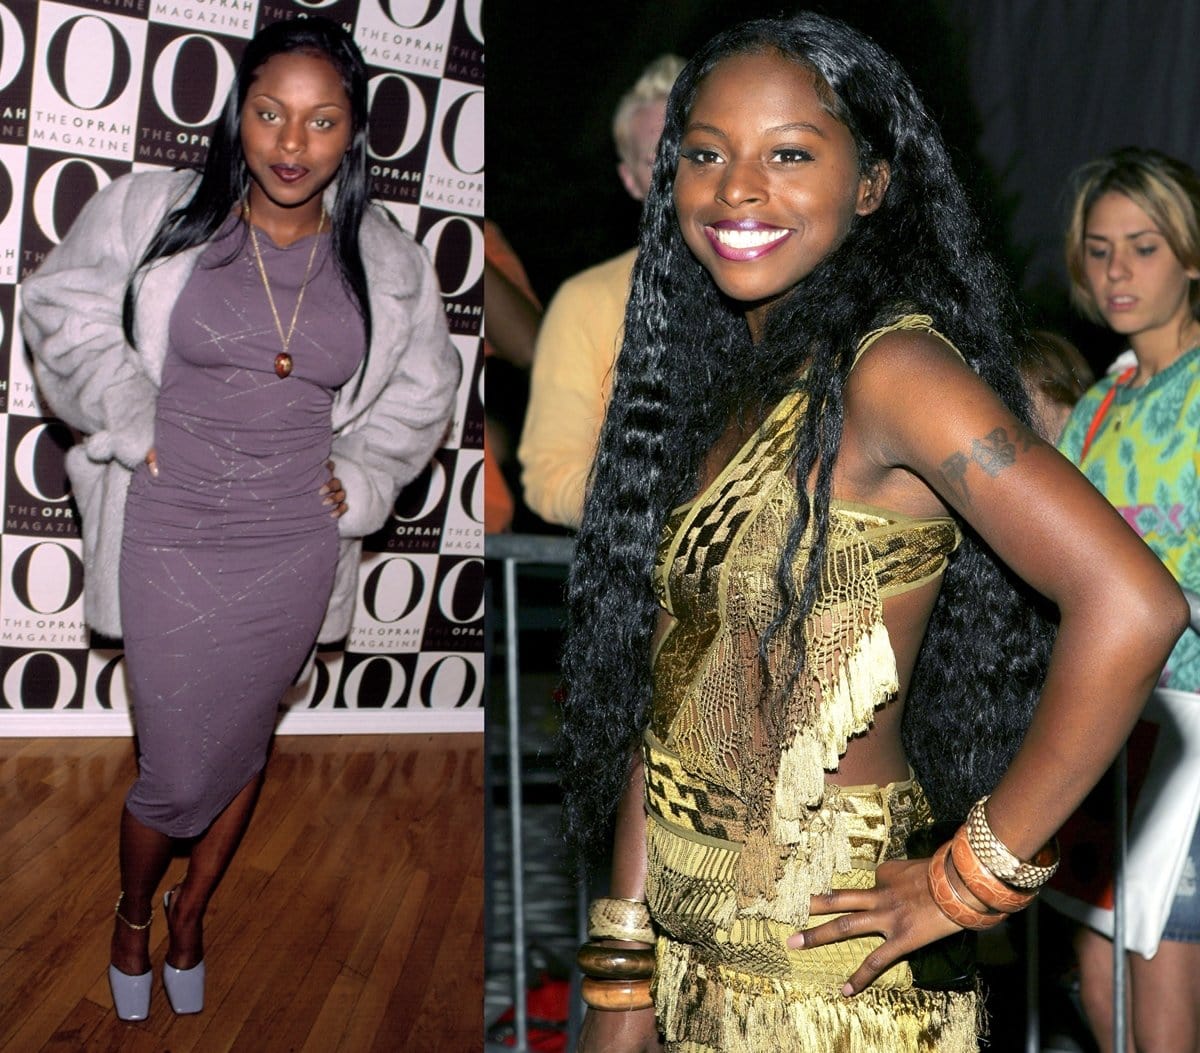 Inga DeCarlo Fung Marchand, professionally known as Foxy Brown, is an American rapper who gained prominence with her debut album "Ill Na Na," and while she has left a mark on the music industry, her current net worth is estimated to be around $3 million